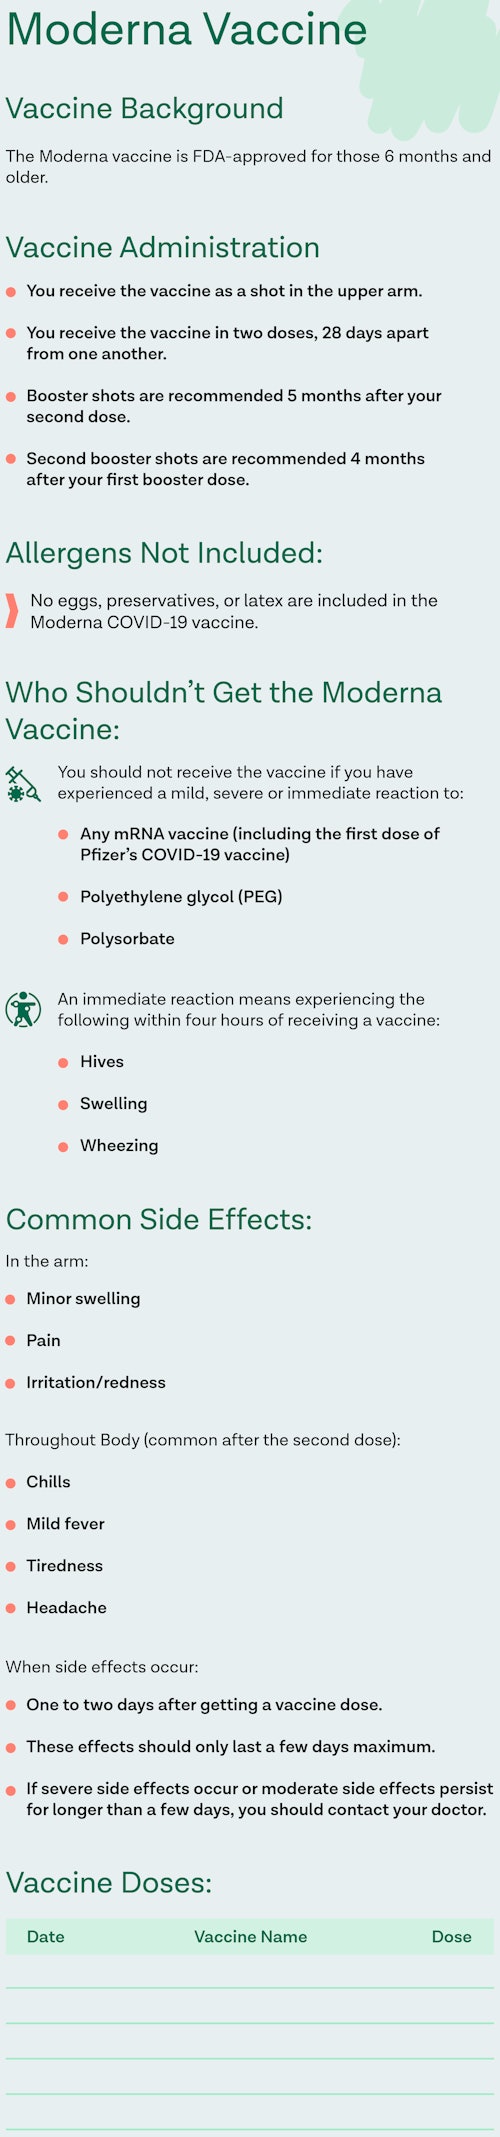 Infographic breaking down must-know information on the Moderna COVID-19 Vaccine.